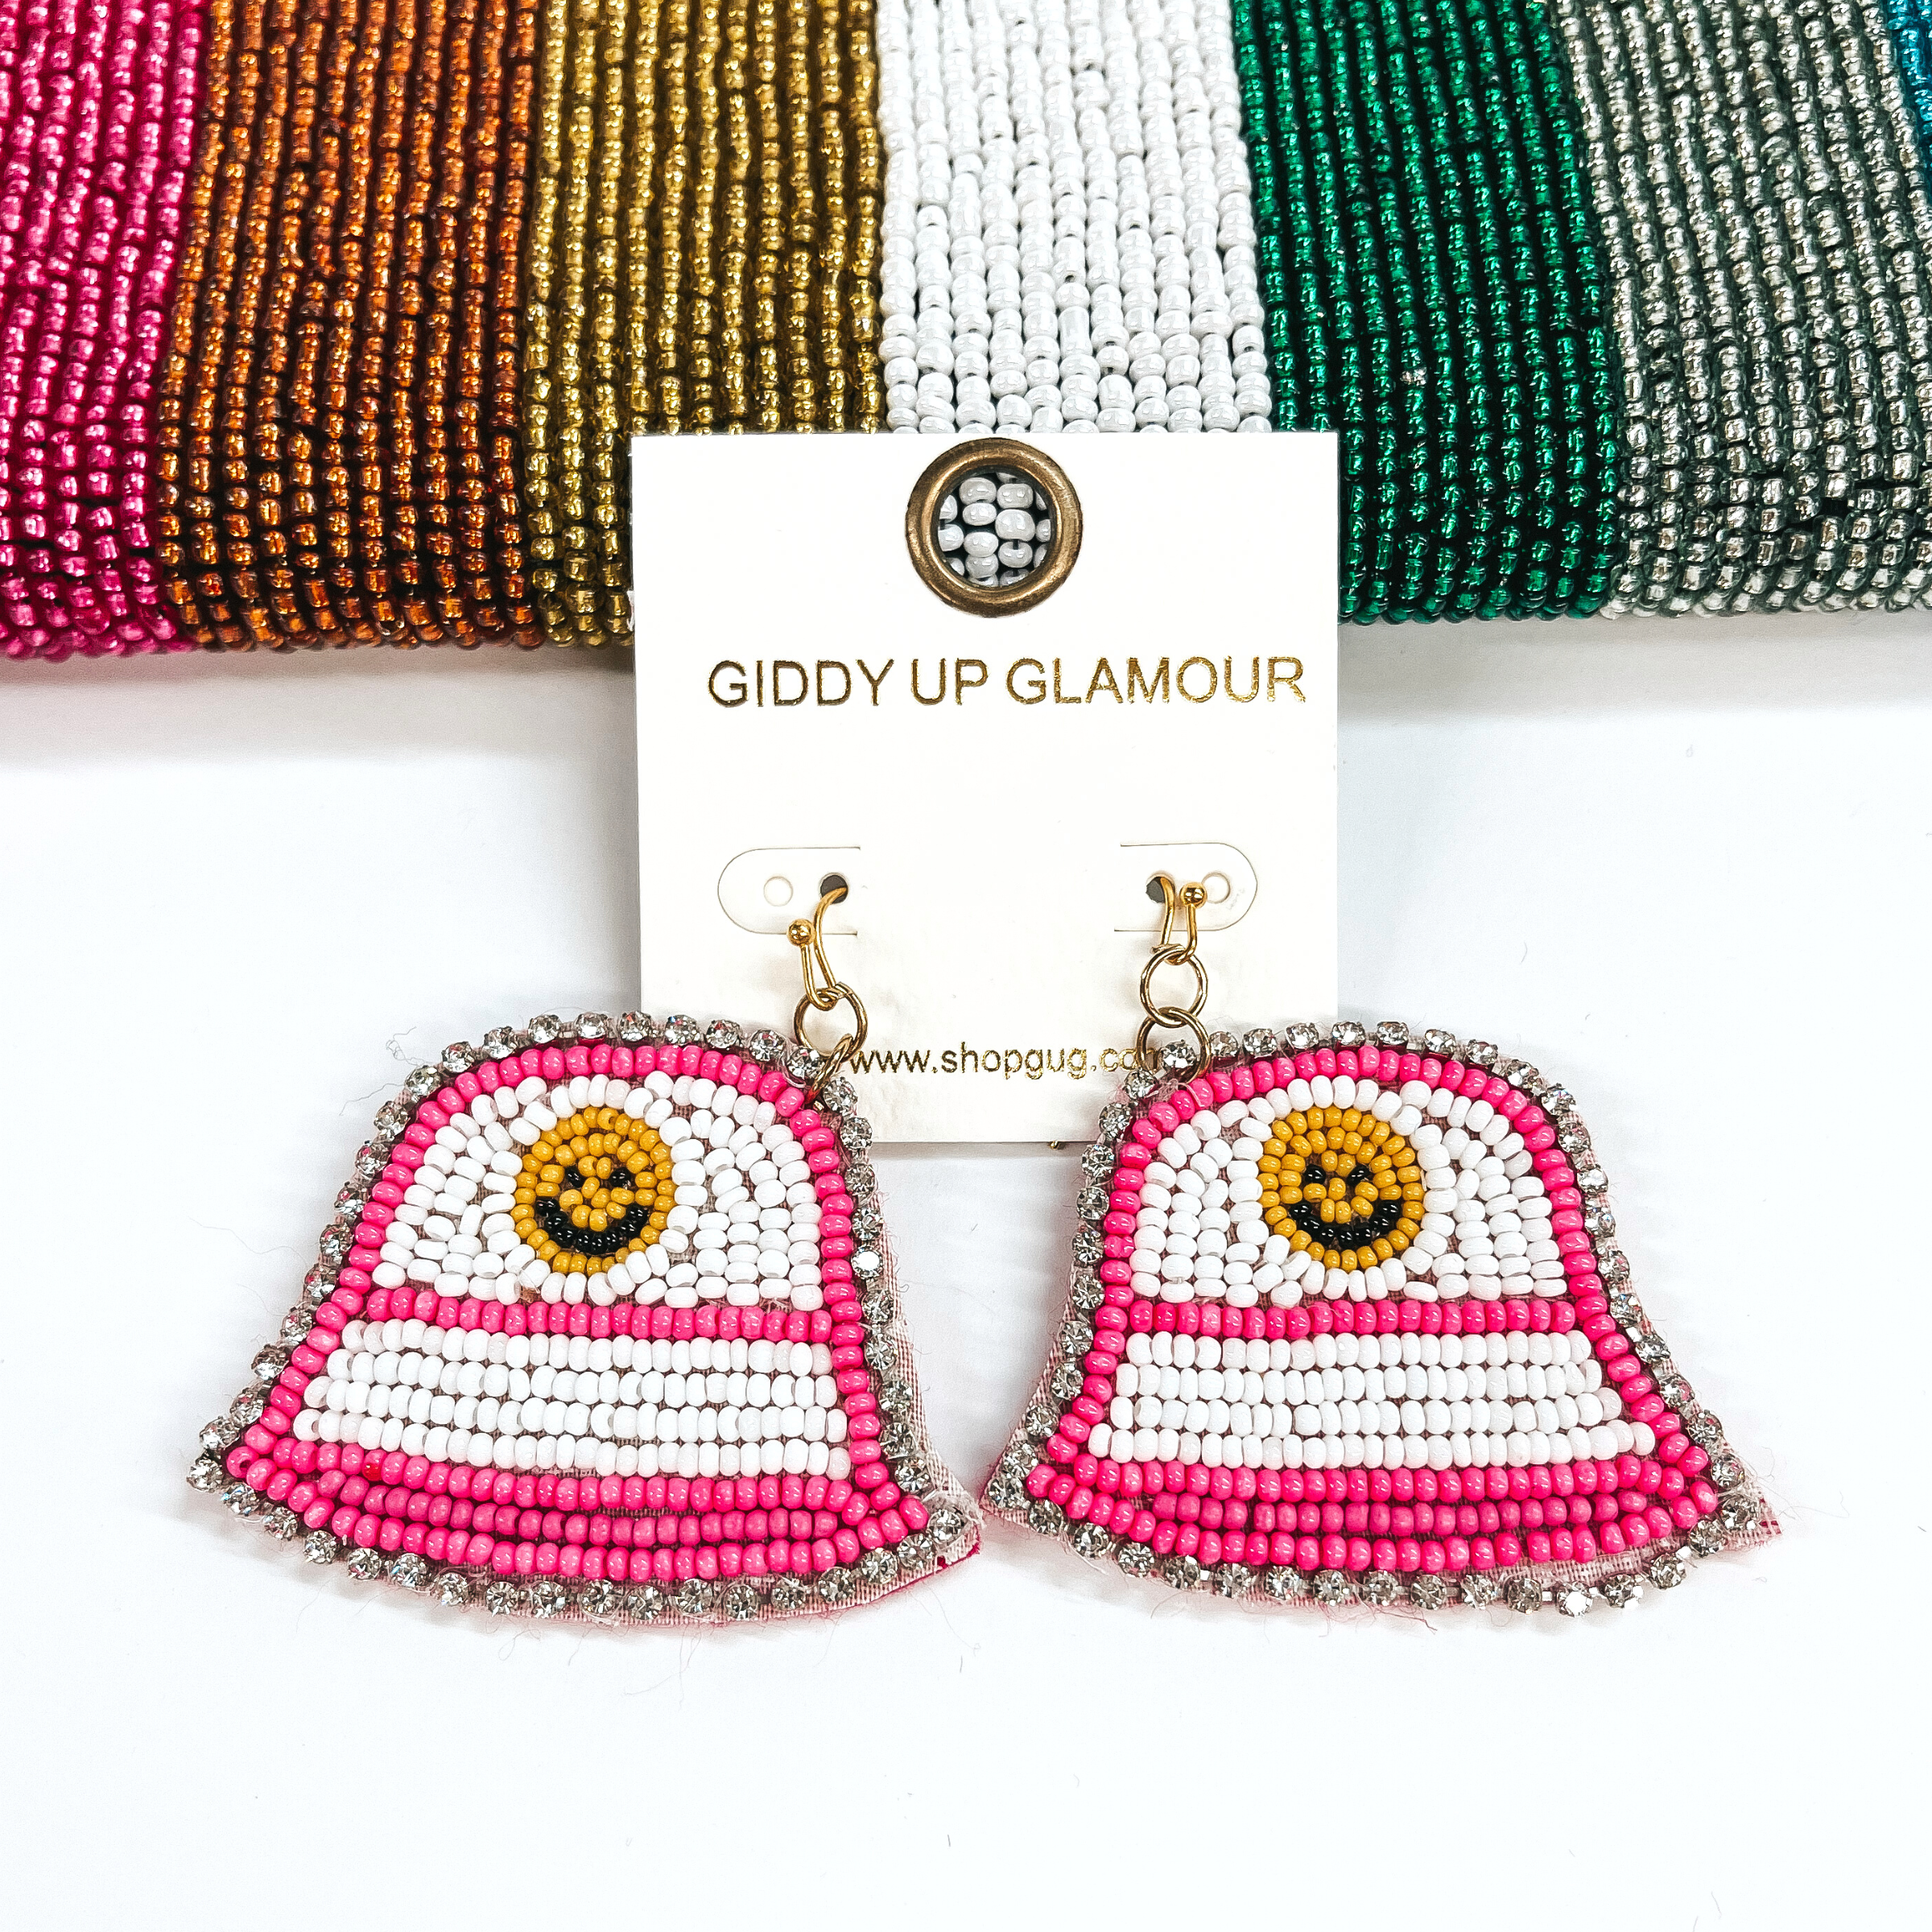 Time To Travel Bucket Hat Beaded Earrings with Happy Face and Clear Rhinestones in White and Hot Pink - Giddy Up Glamour Boutique